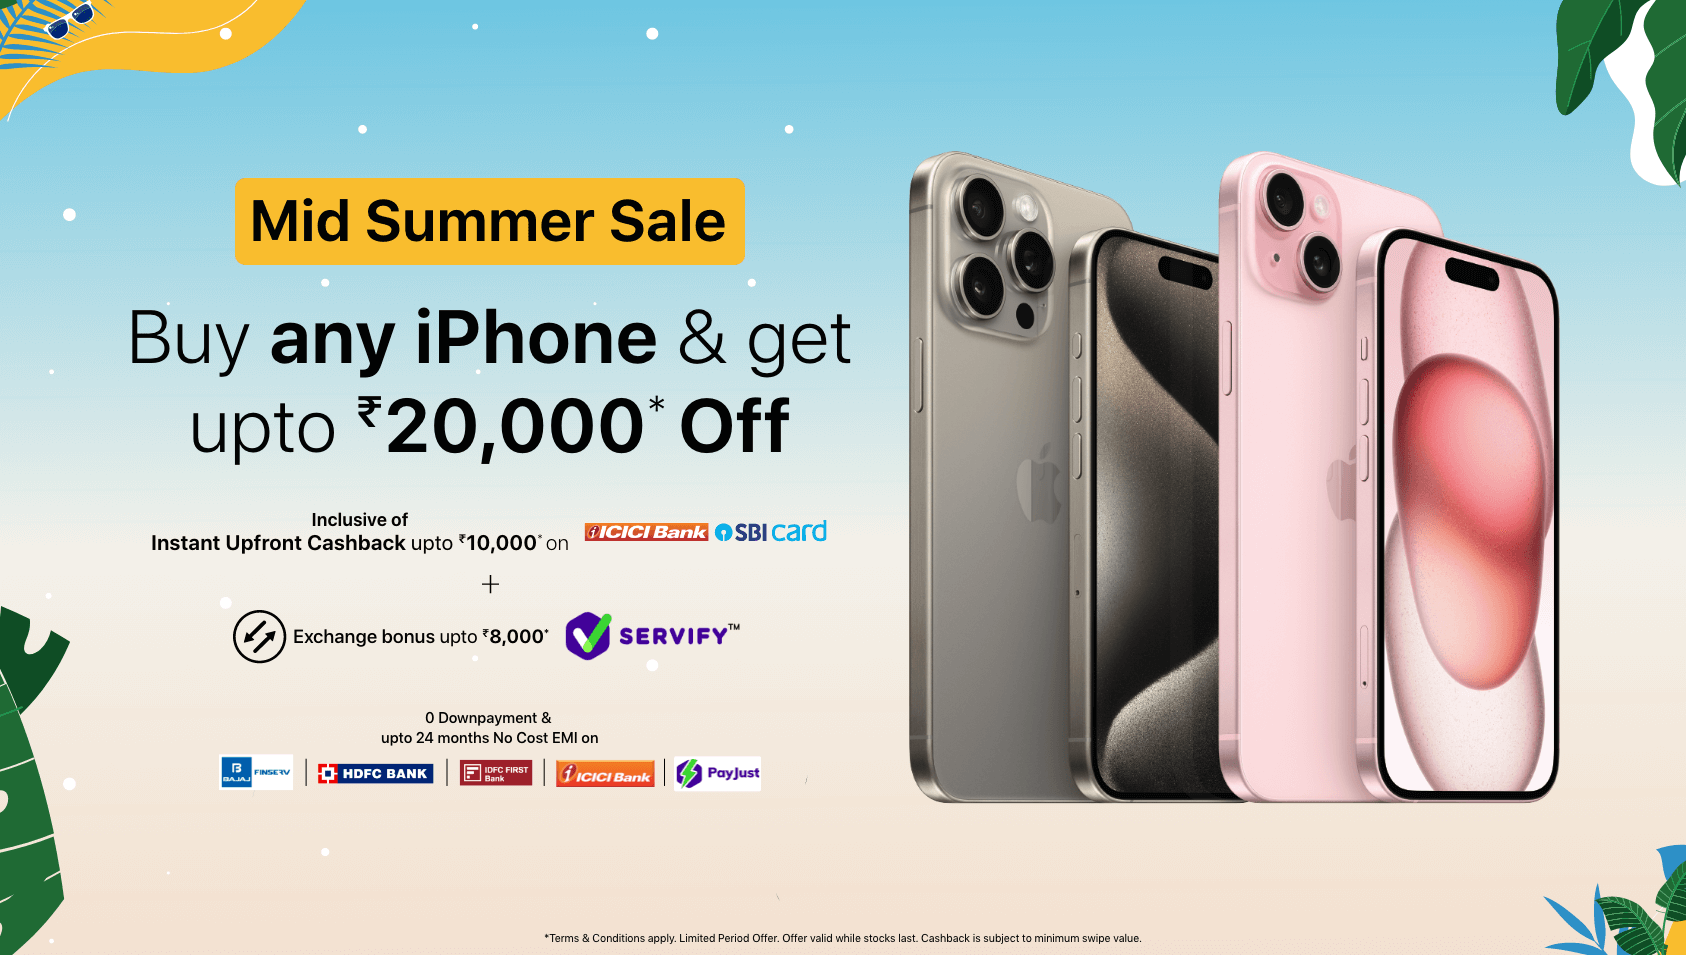 Exclusive Offers on Apple Products